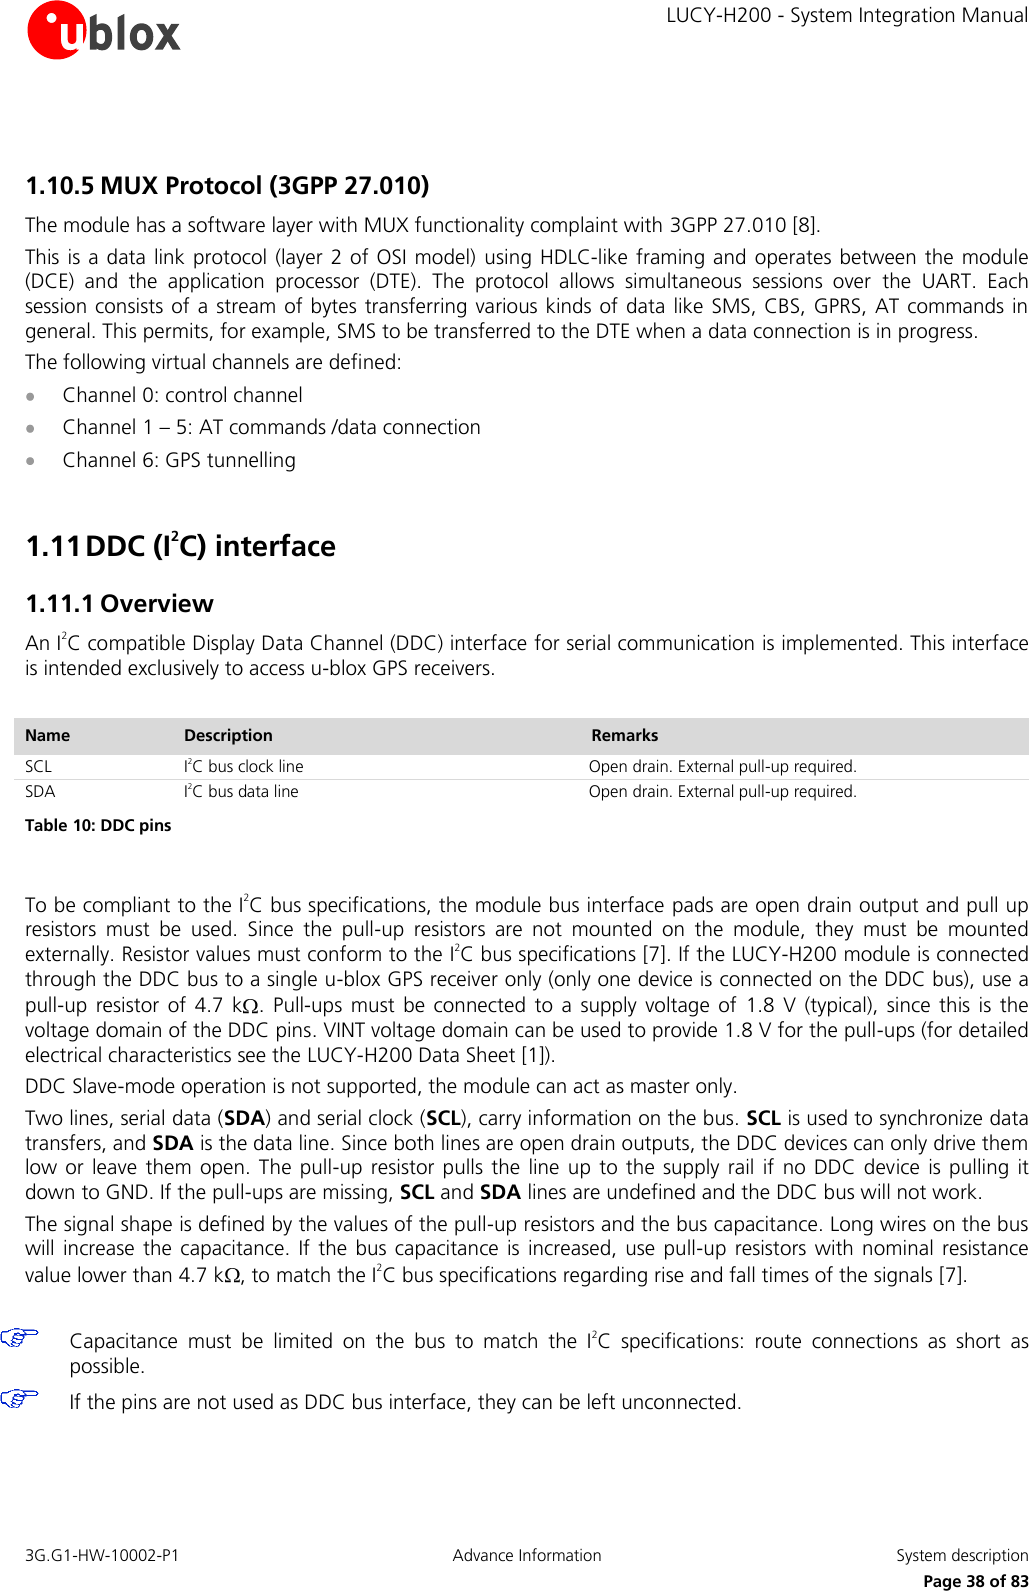     LUCY-H200 - System Integration Manual 3G.G1-HW-10002-P1  Advance Information  System description      Page 38 of 83  1.10.5 MUX Protocol (3GPP 27.010) The module has a software layer with MUX functionality complaint with 3GPP 27.010 [8]. This is a data link protocol (layer 2 of OSI model) using HDLC-like framing and  operates between the module (DCE)  and  the  application  processor  (DTE).  The  protocol  allows  simultaneous  sessions  over  the  UART.  Each session consists of a stream of  bytes transferring various kinds of data like SMS, CBS, GPRS, AT commands in general. This permits, for example, SMS to be transferred to the DTE when a data connection is in progress. The following virtual channels are defined:  Channel 0: control channel  Channel 1 – 5: AT commands /data connection  Channel 6: GPS tunnelling  1.11 DDC (I2C) interface 1.11.1 Overview An I2C compatible Display Data Channel (DDC) interface for serial communication is implemented. This interface is intended exclusively to access u-blox GPS receivers.  Name Description Remarks SCL I2C bus clock line Open drain. External pull-up required. SDA I2C bus data line Open drain. External pull-up required. Table 10: DDC pins  To be compliant to the I2C bus specifications, the module bus interface pads are open drain output and pull up resistors  must  be  used.  Since  the  pull-up  resistors  are  not  mounted  on  the  module,  they  must  be  mounted externally. Resistor values must conform to the I2C bus specifications [7]. If the LUCY-H200 module is connected through the DDC bus to a single u-blox GPS receiver only (only one device is connected on the DDC bus), use a pull-up  resistor  of  4.7  k .  Pull-ups must  be  connected  to  a  supply voltage  of  1.8  V  (typical),  since  this  is  the voltage domain of the DDC pins. VINT voltage domain can be used to provide 1.8 V for the pull-ups (for detailed electrical characteristics see the LUCY-H200 Data Sheet [1]). DDC Slave-mode operation is not supported, the module can act as master only. Two lines, serial data (SDA) and serial clock (SCL), carry information on the bus. SCL is used to synchronize data transfers, and SDA is the data line. Since both lines are open drain outputs, the DDC devices can only drive them low or leave  them open. The pull-up resistor  pulls the  line  up to the  supply  rail if  no DDC  device  is  pulling it down to GND. If the pull-ups are missing, SCL and SDA lines are undefined and the DDC bus will not work. The signal shape is defined by the values of the pull-up resistors and the bus capacitance. Long wires on the bus will increase  the capacitance. If  the  bus capacitance  is  increased,  use  pull-up resistors  with nominal  resistance value lower than 4.7 k , to match the I2C bus specifications regarding rise and fall times of the signals [7].    Capacitance  must  be  limited  on  the  bus  to  match  the  I2C  specifications:  route  connections  as  short  as possible.   If the pins are not used as DDC bus interface, they can be left unconnected.  